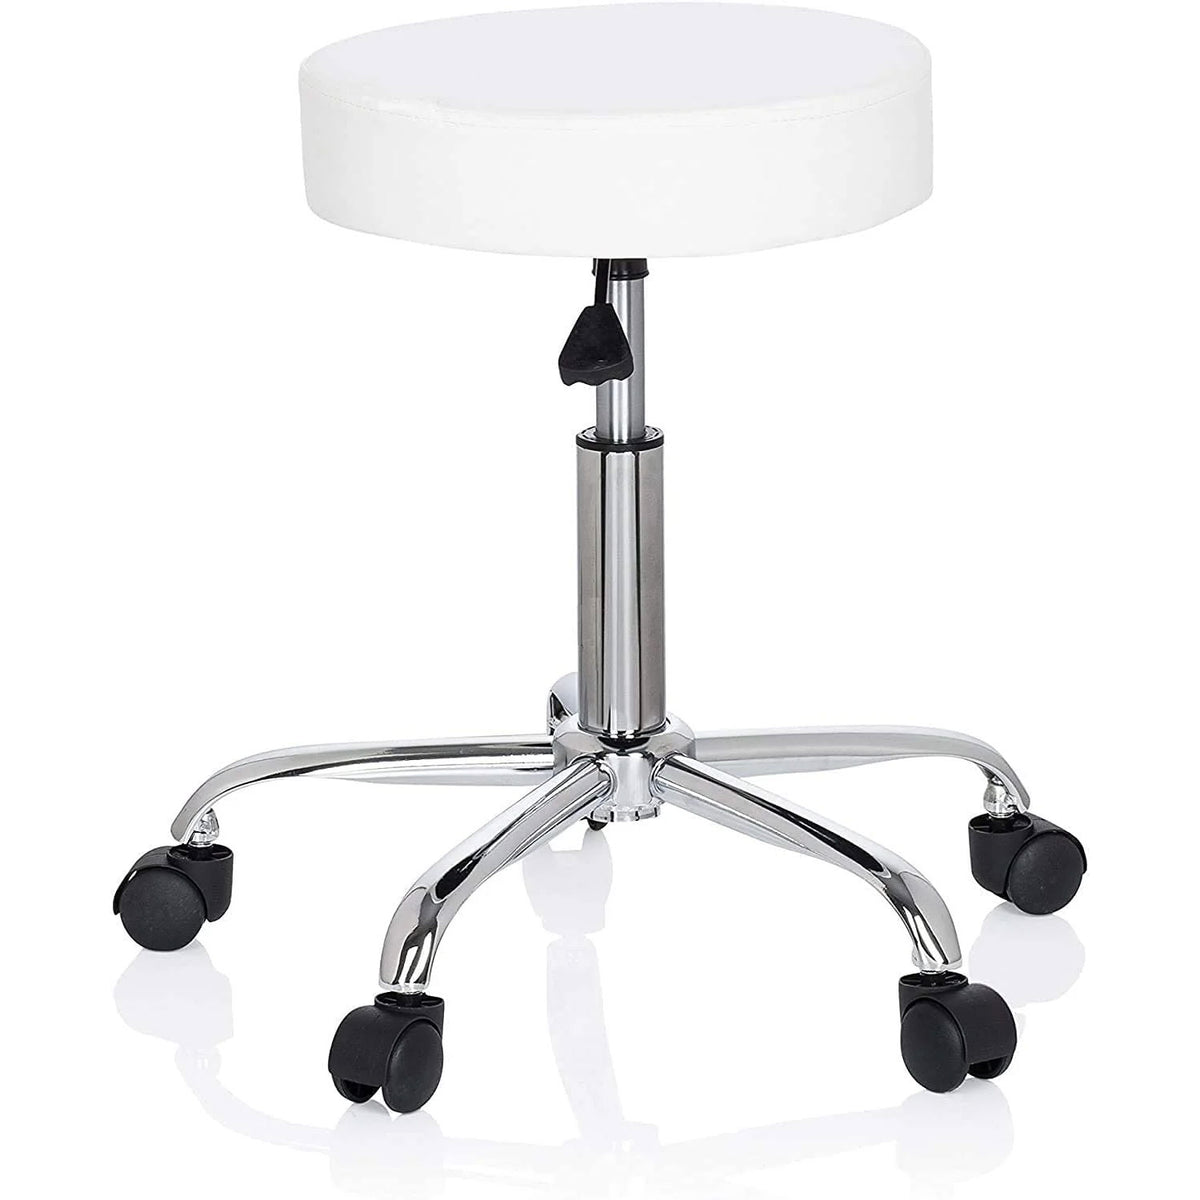 SmileSellers Height-Adjustable revolving Stool | Great for use in Salons, Bar, Schools, Hospital, Offices, Warehouses, Home or Garage | Height extendable from 16 inch to 22inch (White)